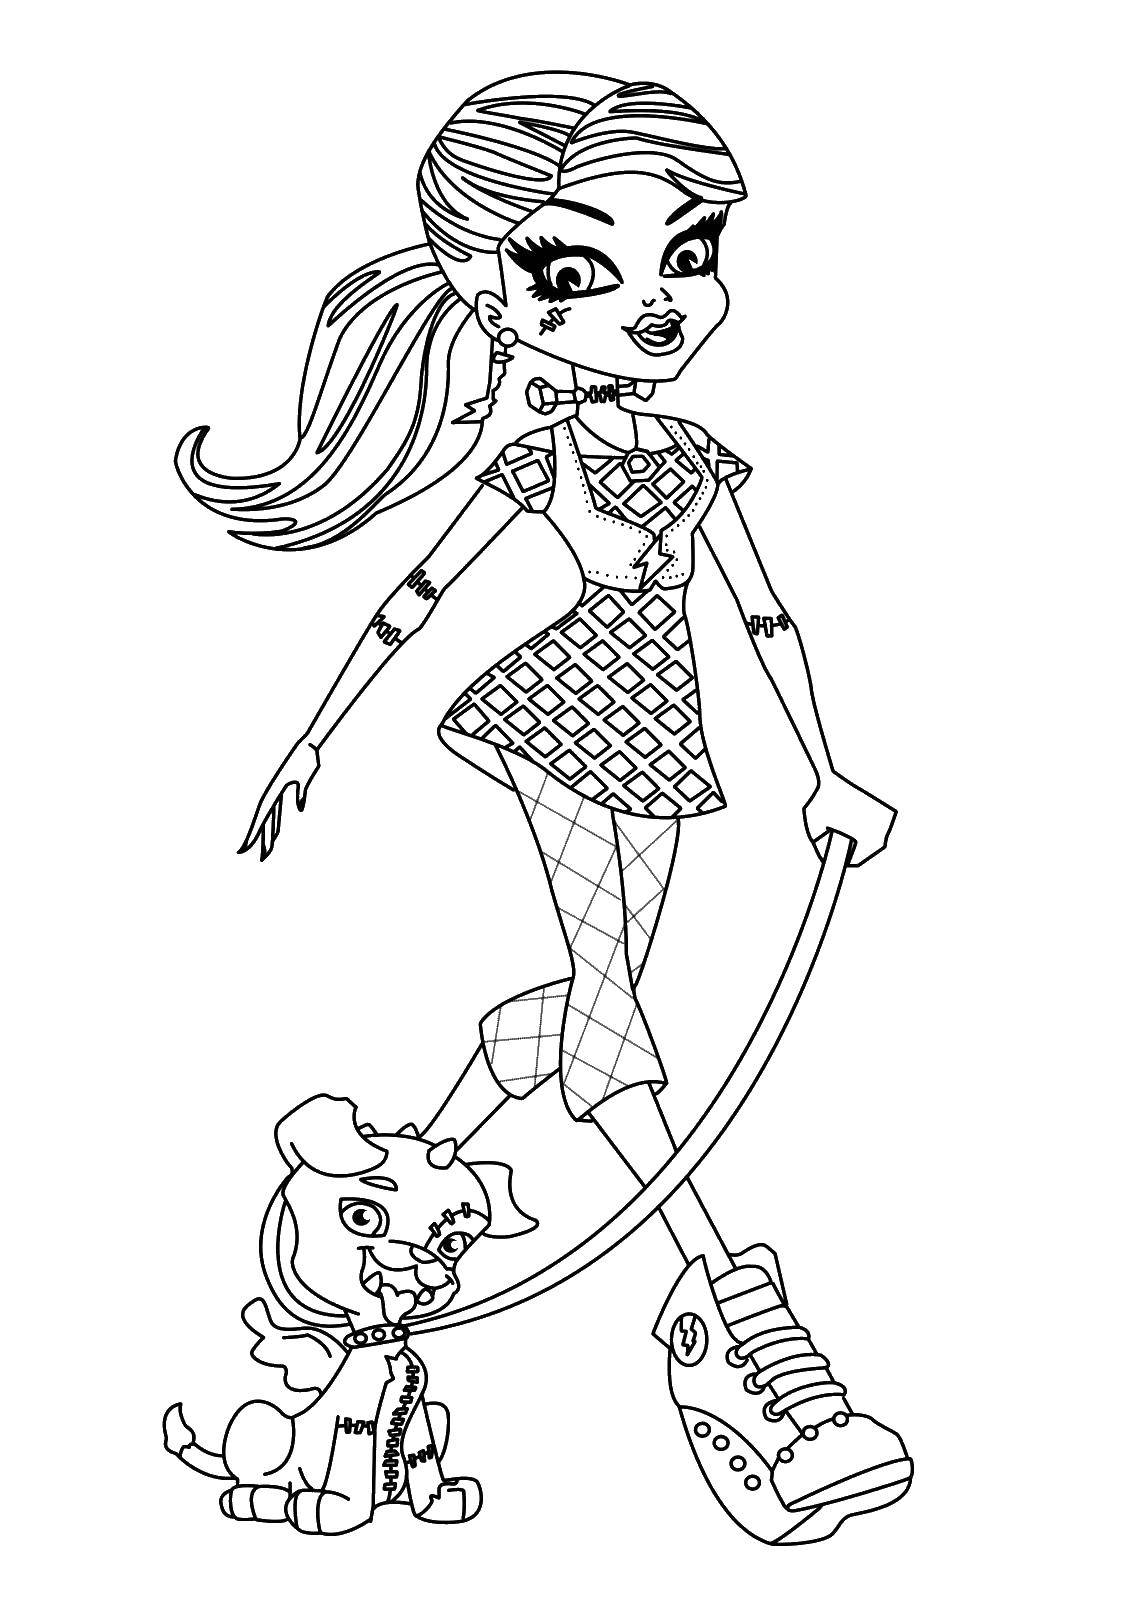 Coloring Monster high doll with a dog. Category Monster high. Tags:  Monster high, doll, cartoon, dog.